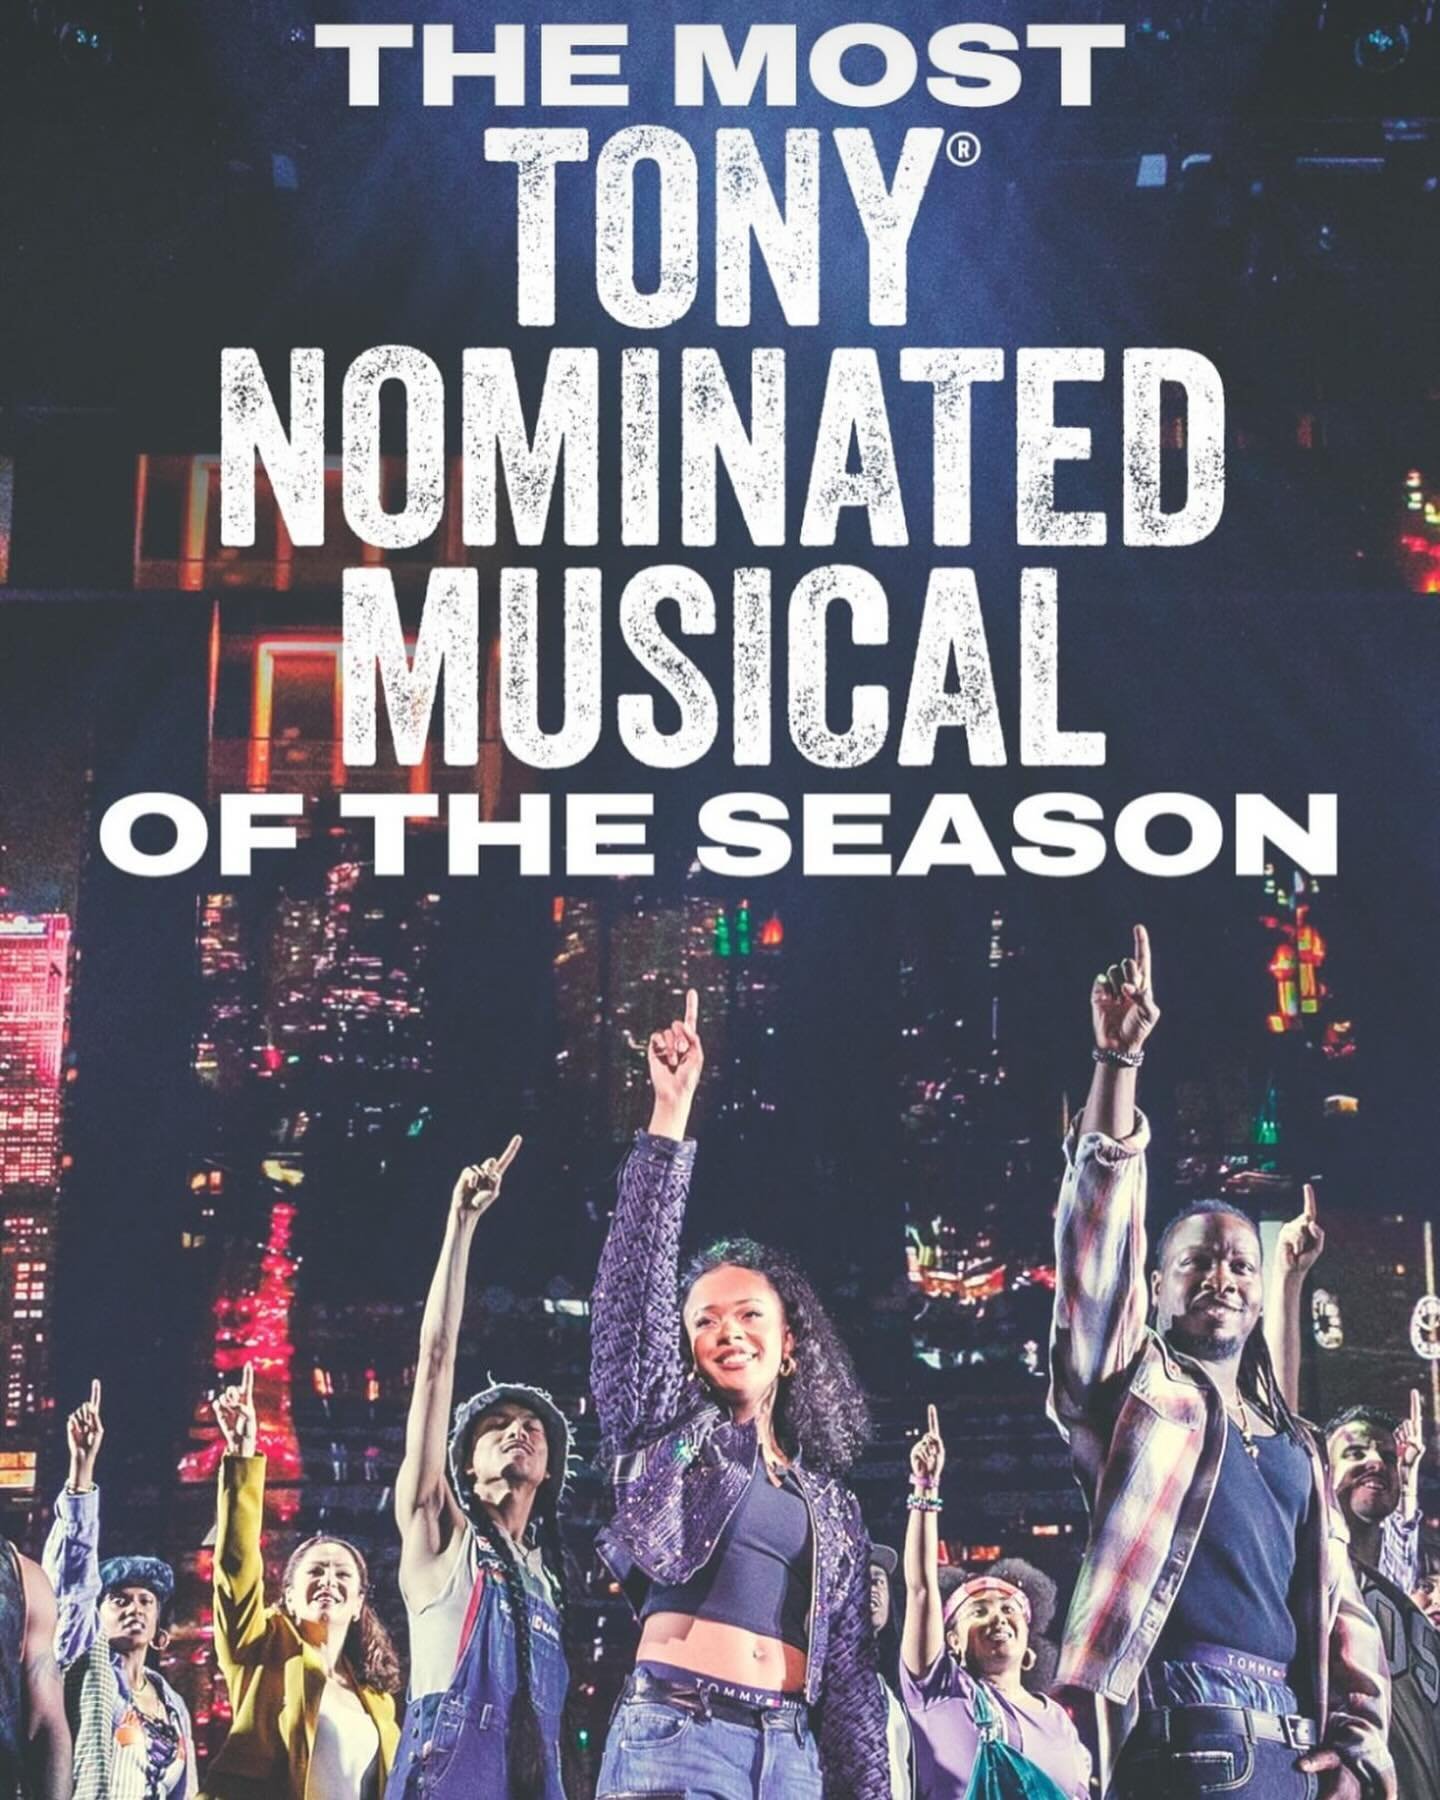 This SHOW is on fire 🔥🔥🔥 Congrats to @hellskitchenbway and @aliciakeys on your Tony nominations!!! This incredible show has the love between a mother and daughter at its core which sounds like a winner to @yourmomcares &hearts;️